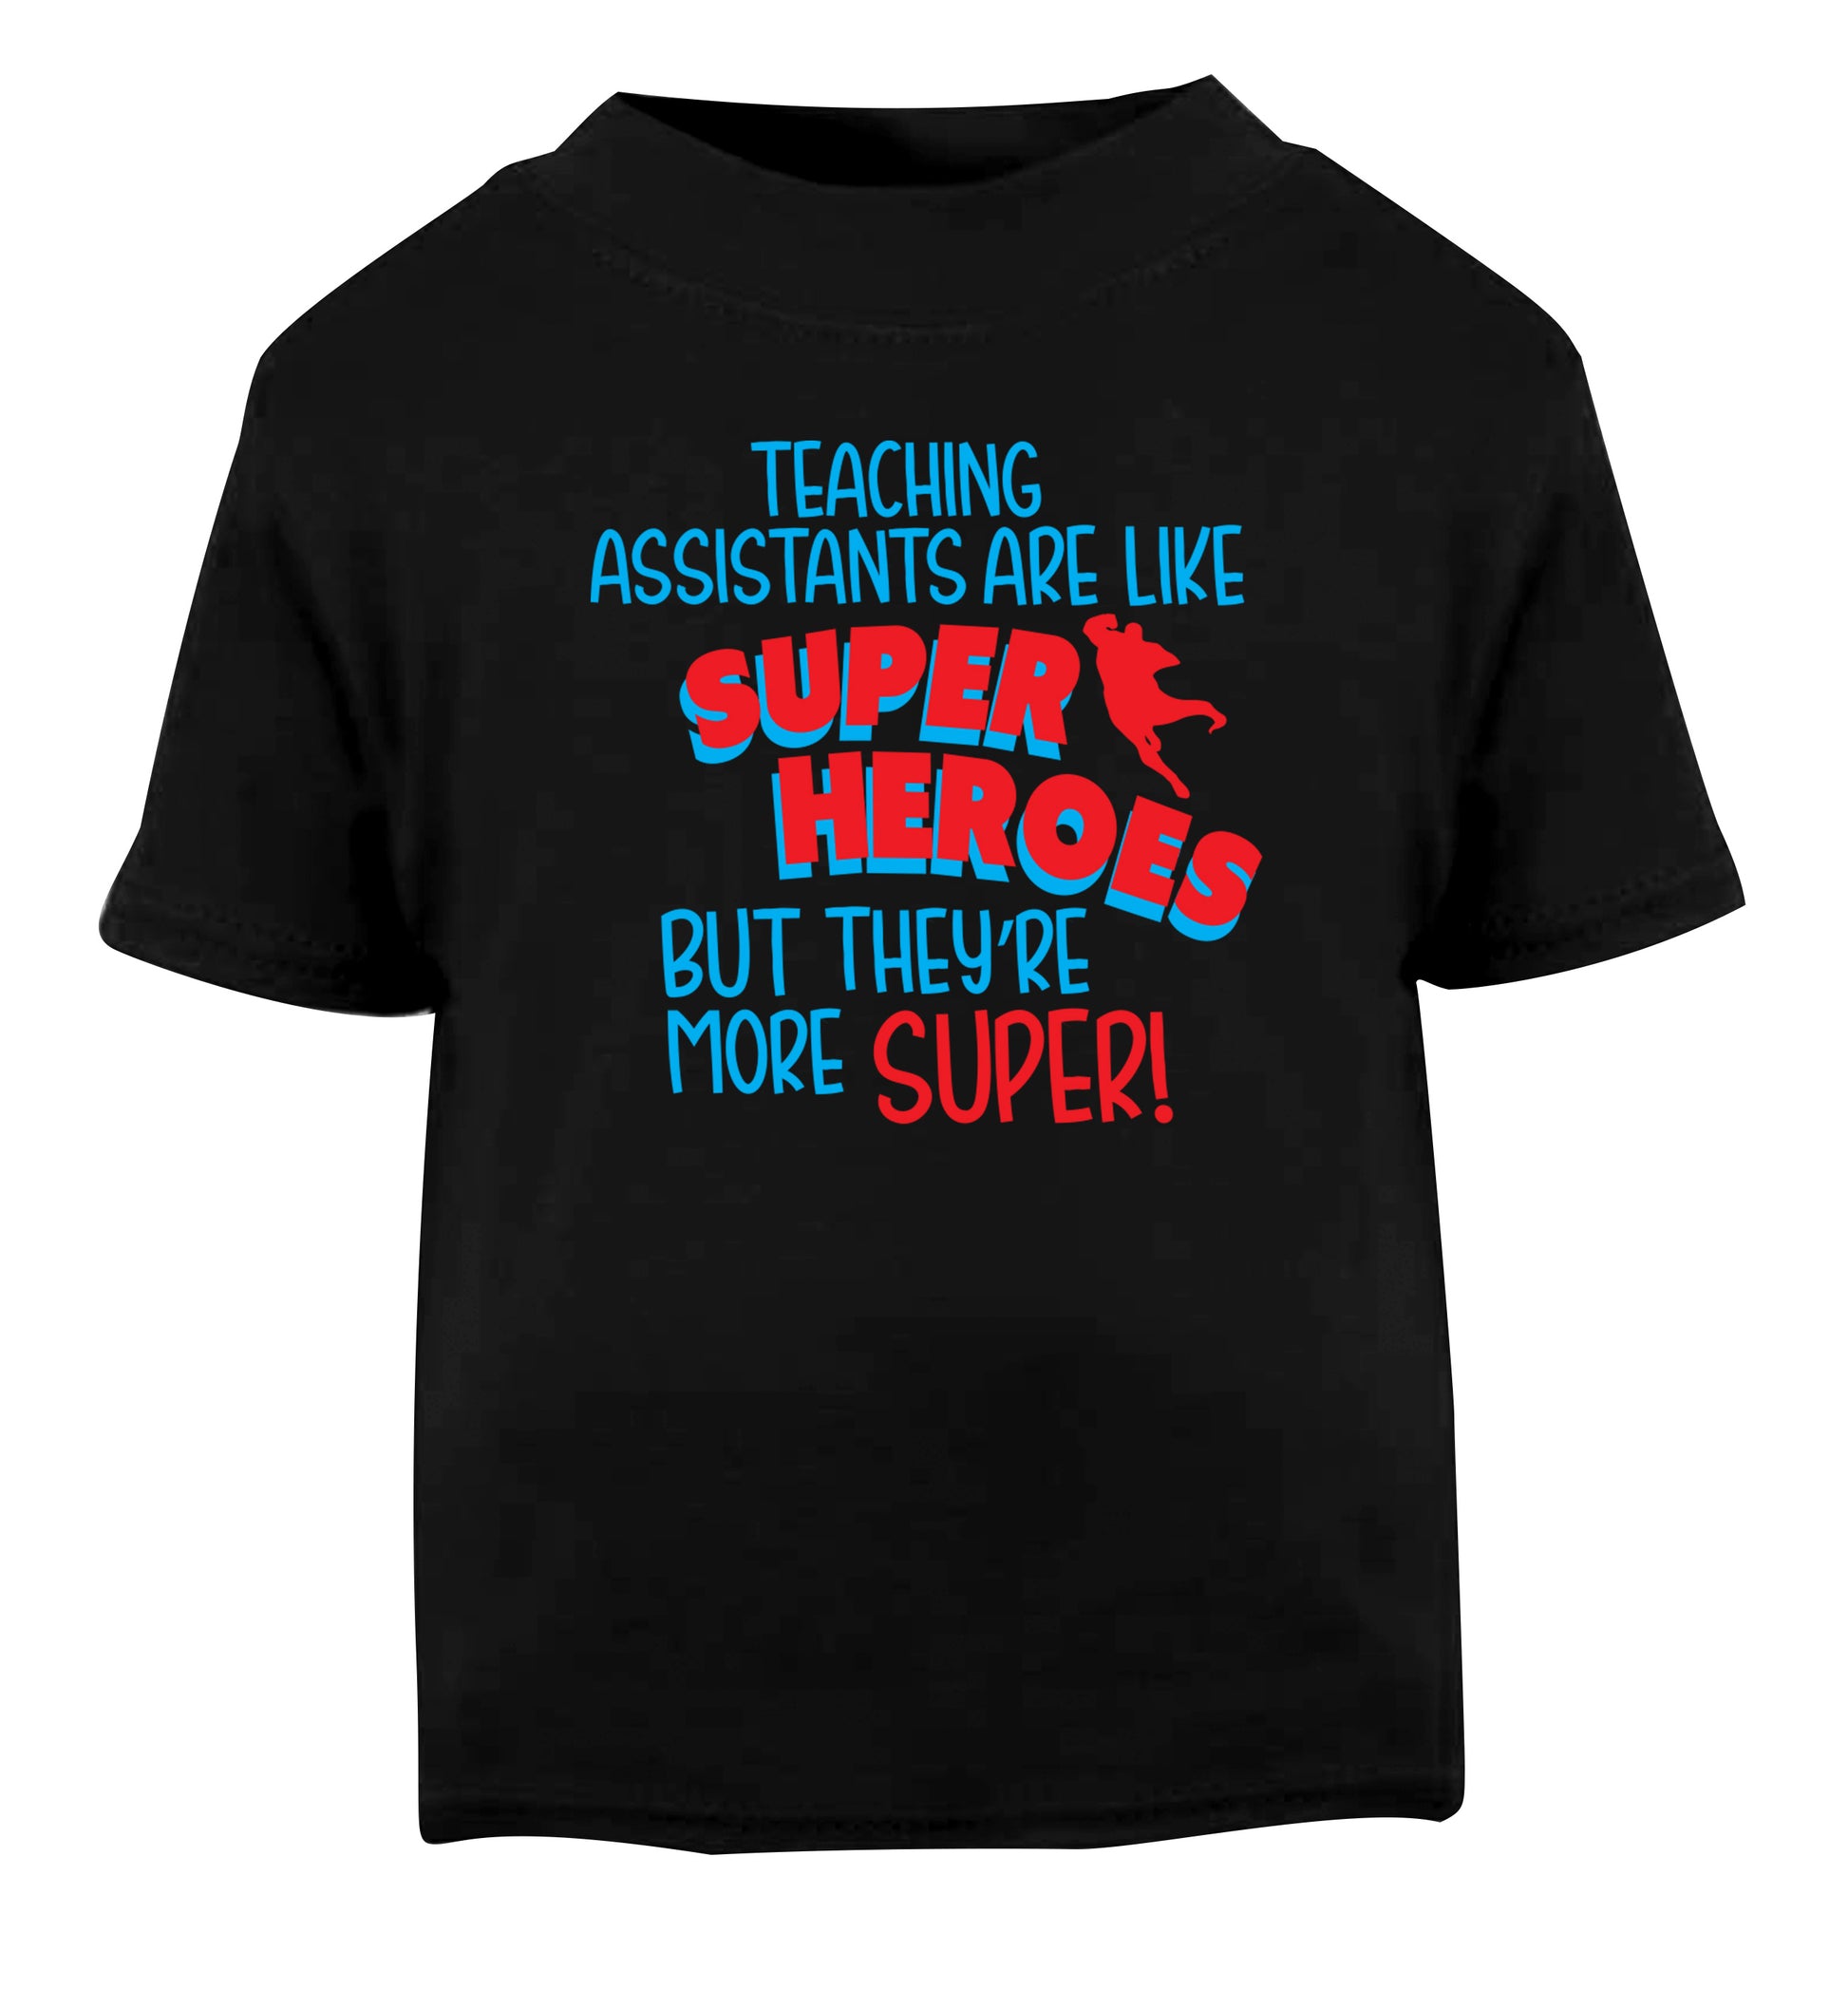 Teaching assistants are like superheros but they're more super Black Baby Toddler Tshirt 2 years